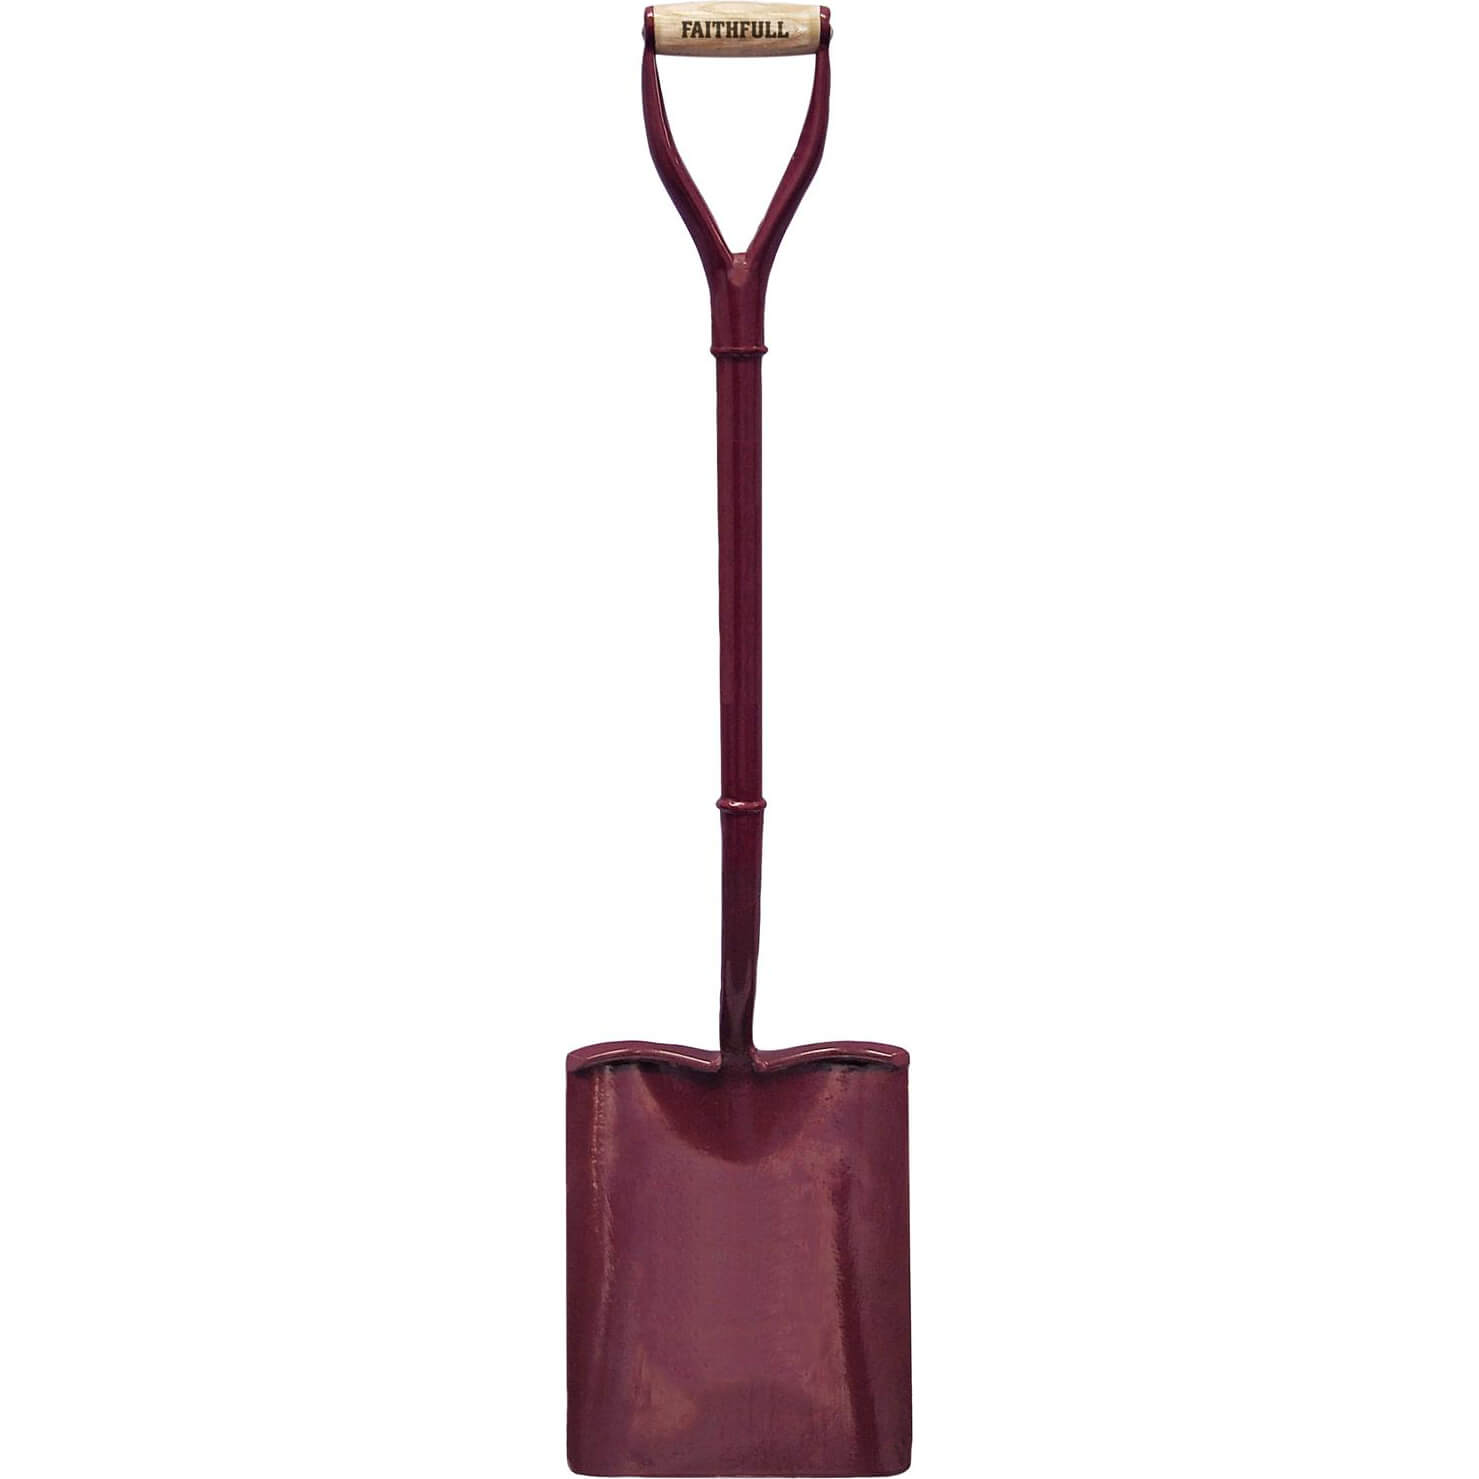 Faithfull All Steel Square Mouth Shovel Size 2 700mm Handle